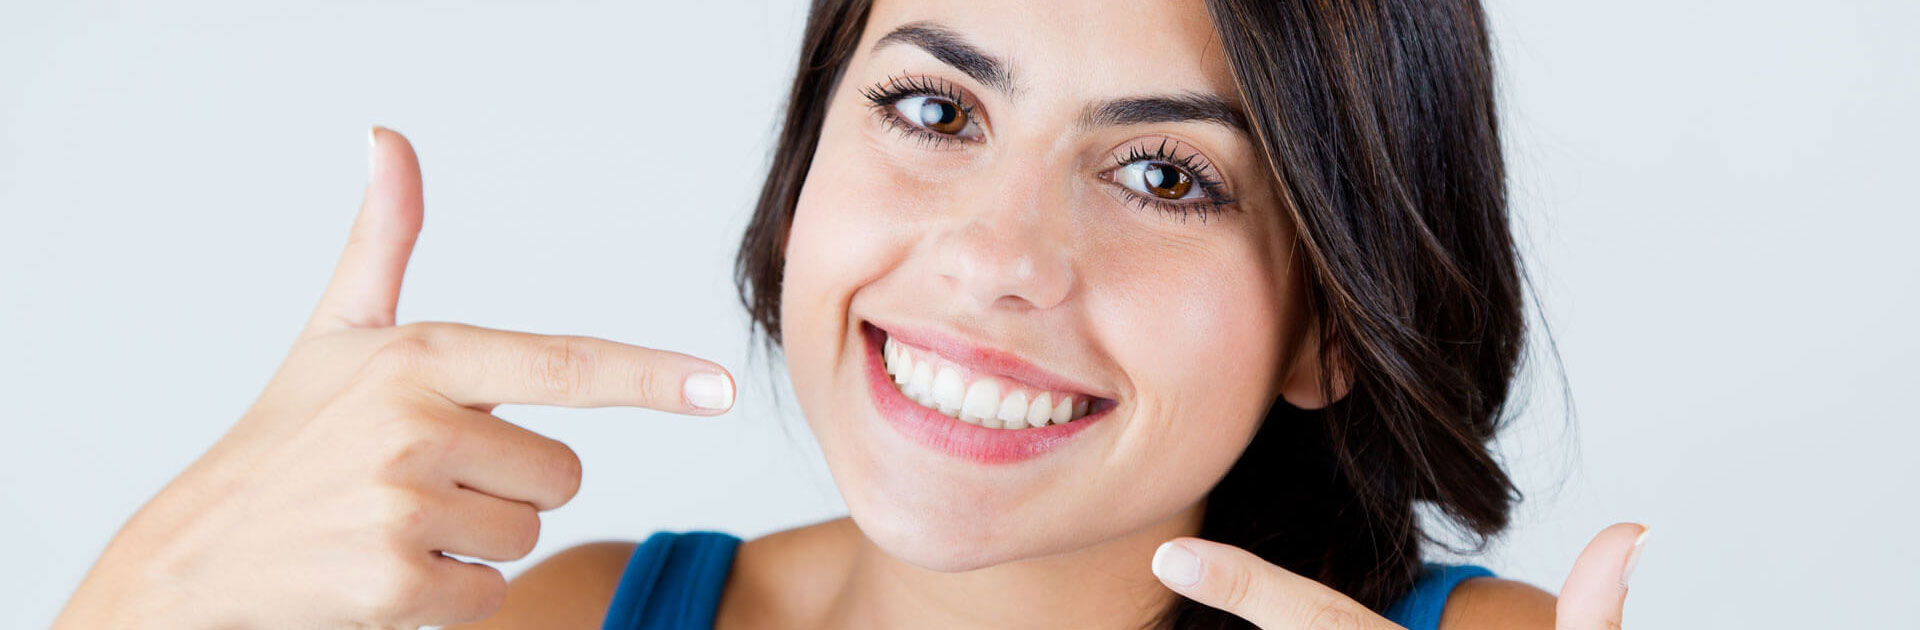 Woman pointing at her teeth